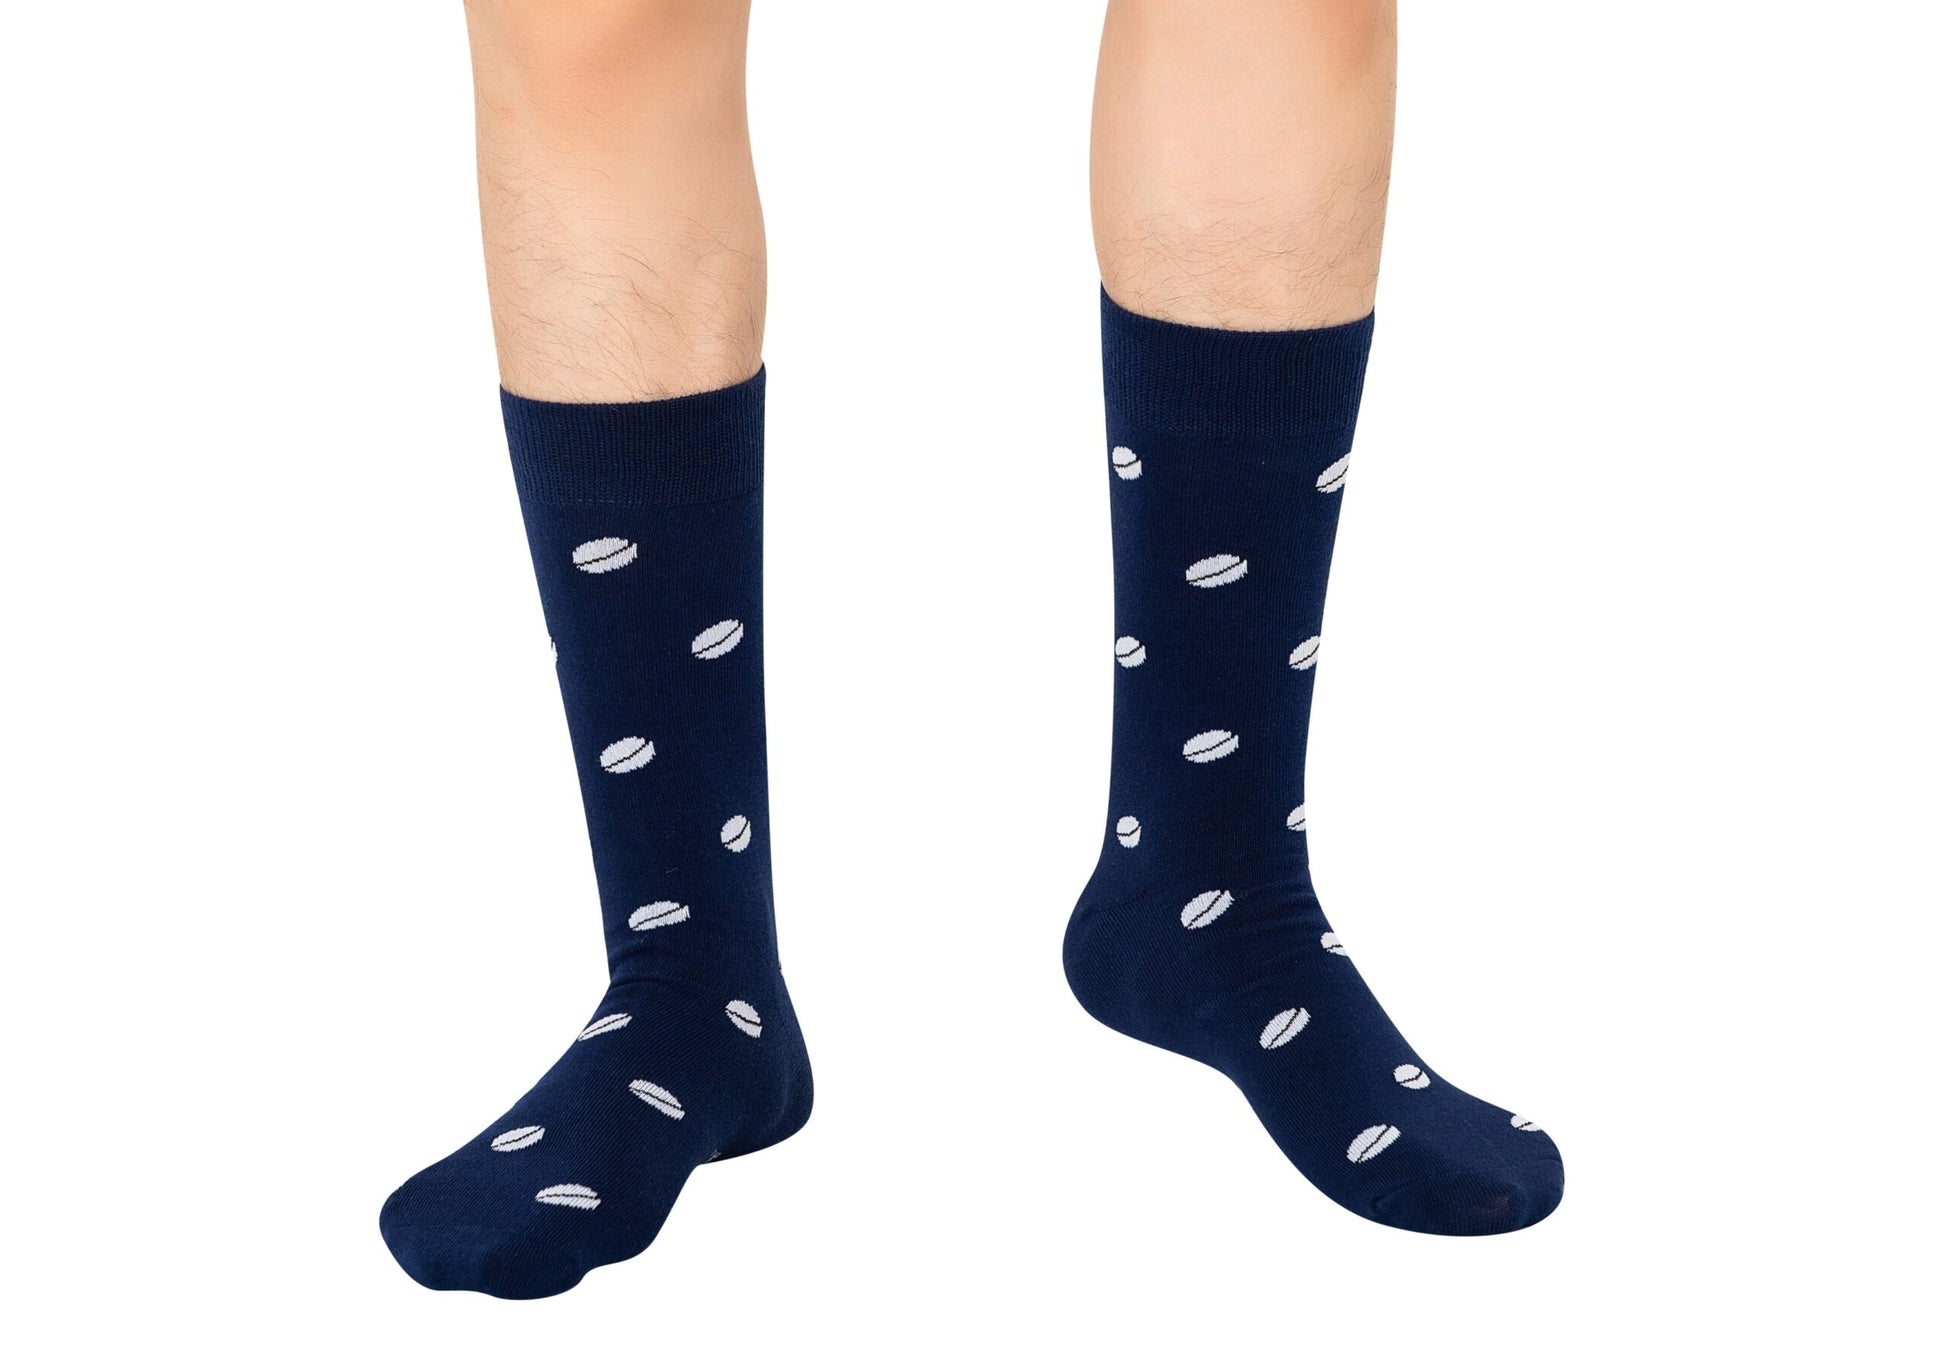 A pair of legs sporting Rugby Socks with white polka dots, shown against a white background.